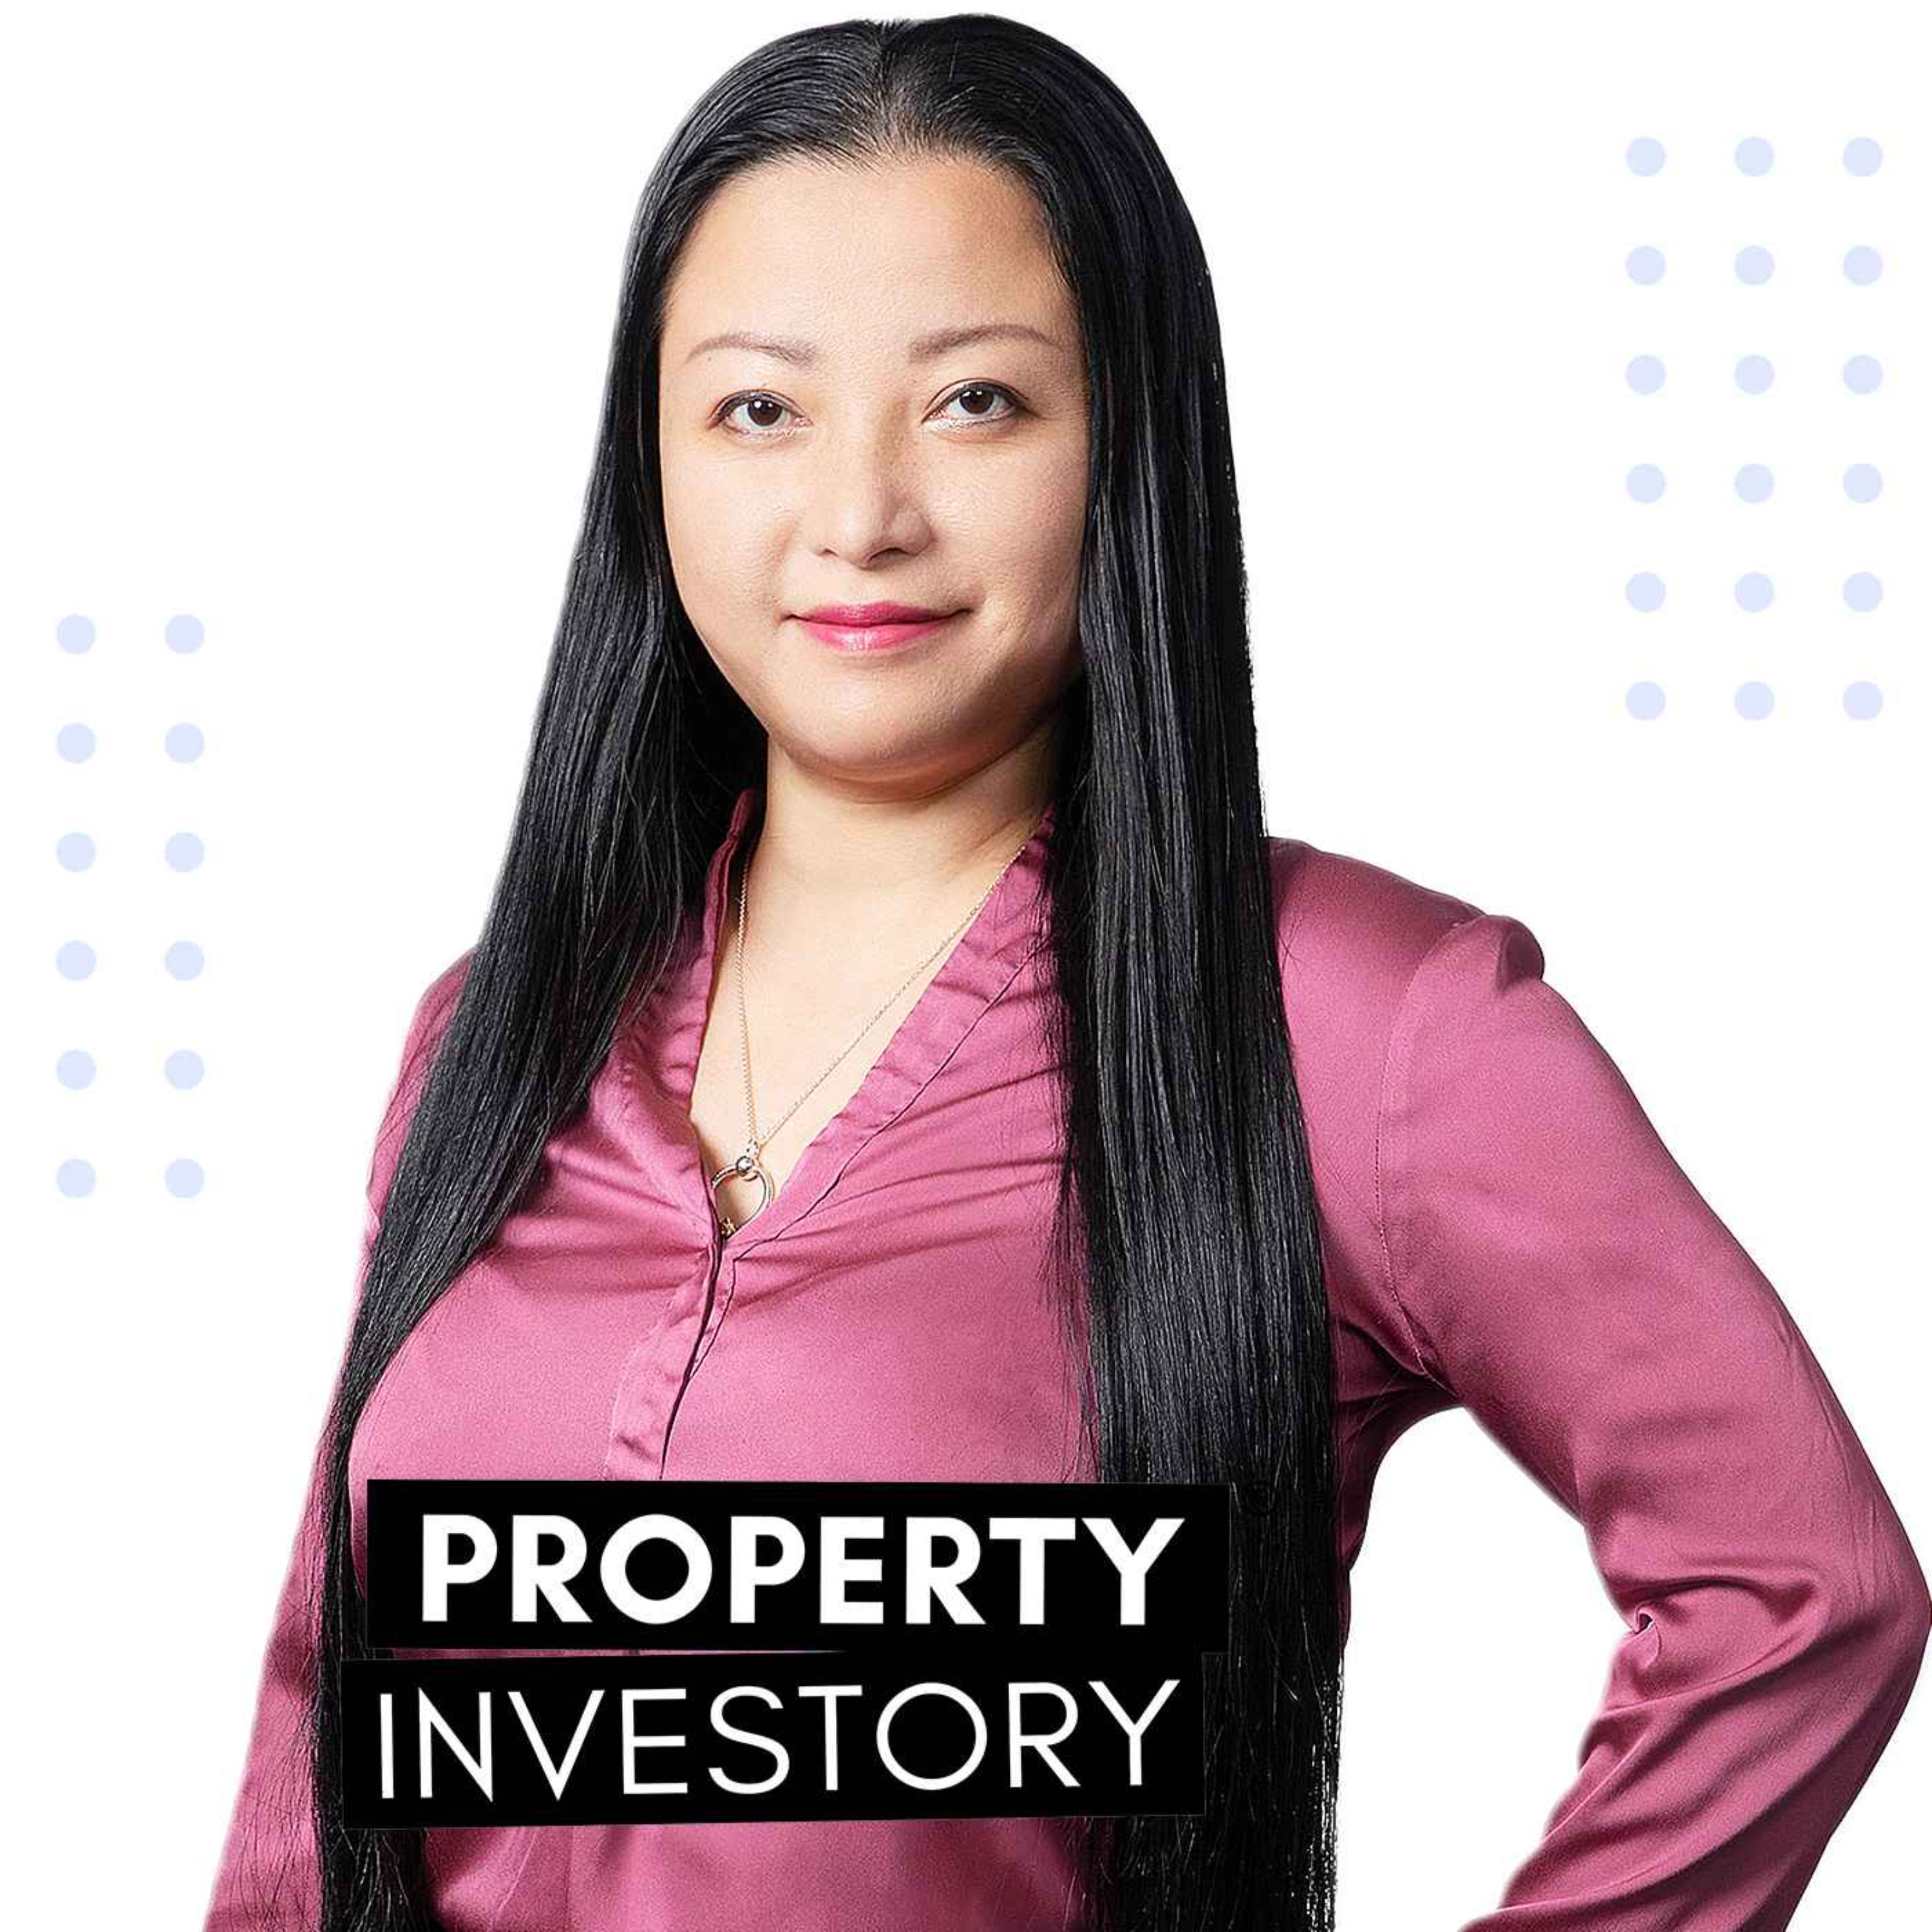 Get Past Your Fear and Simplify Your Strategy with Lianna Pan